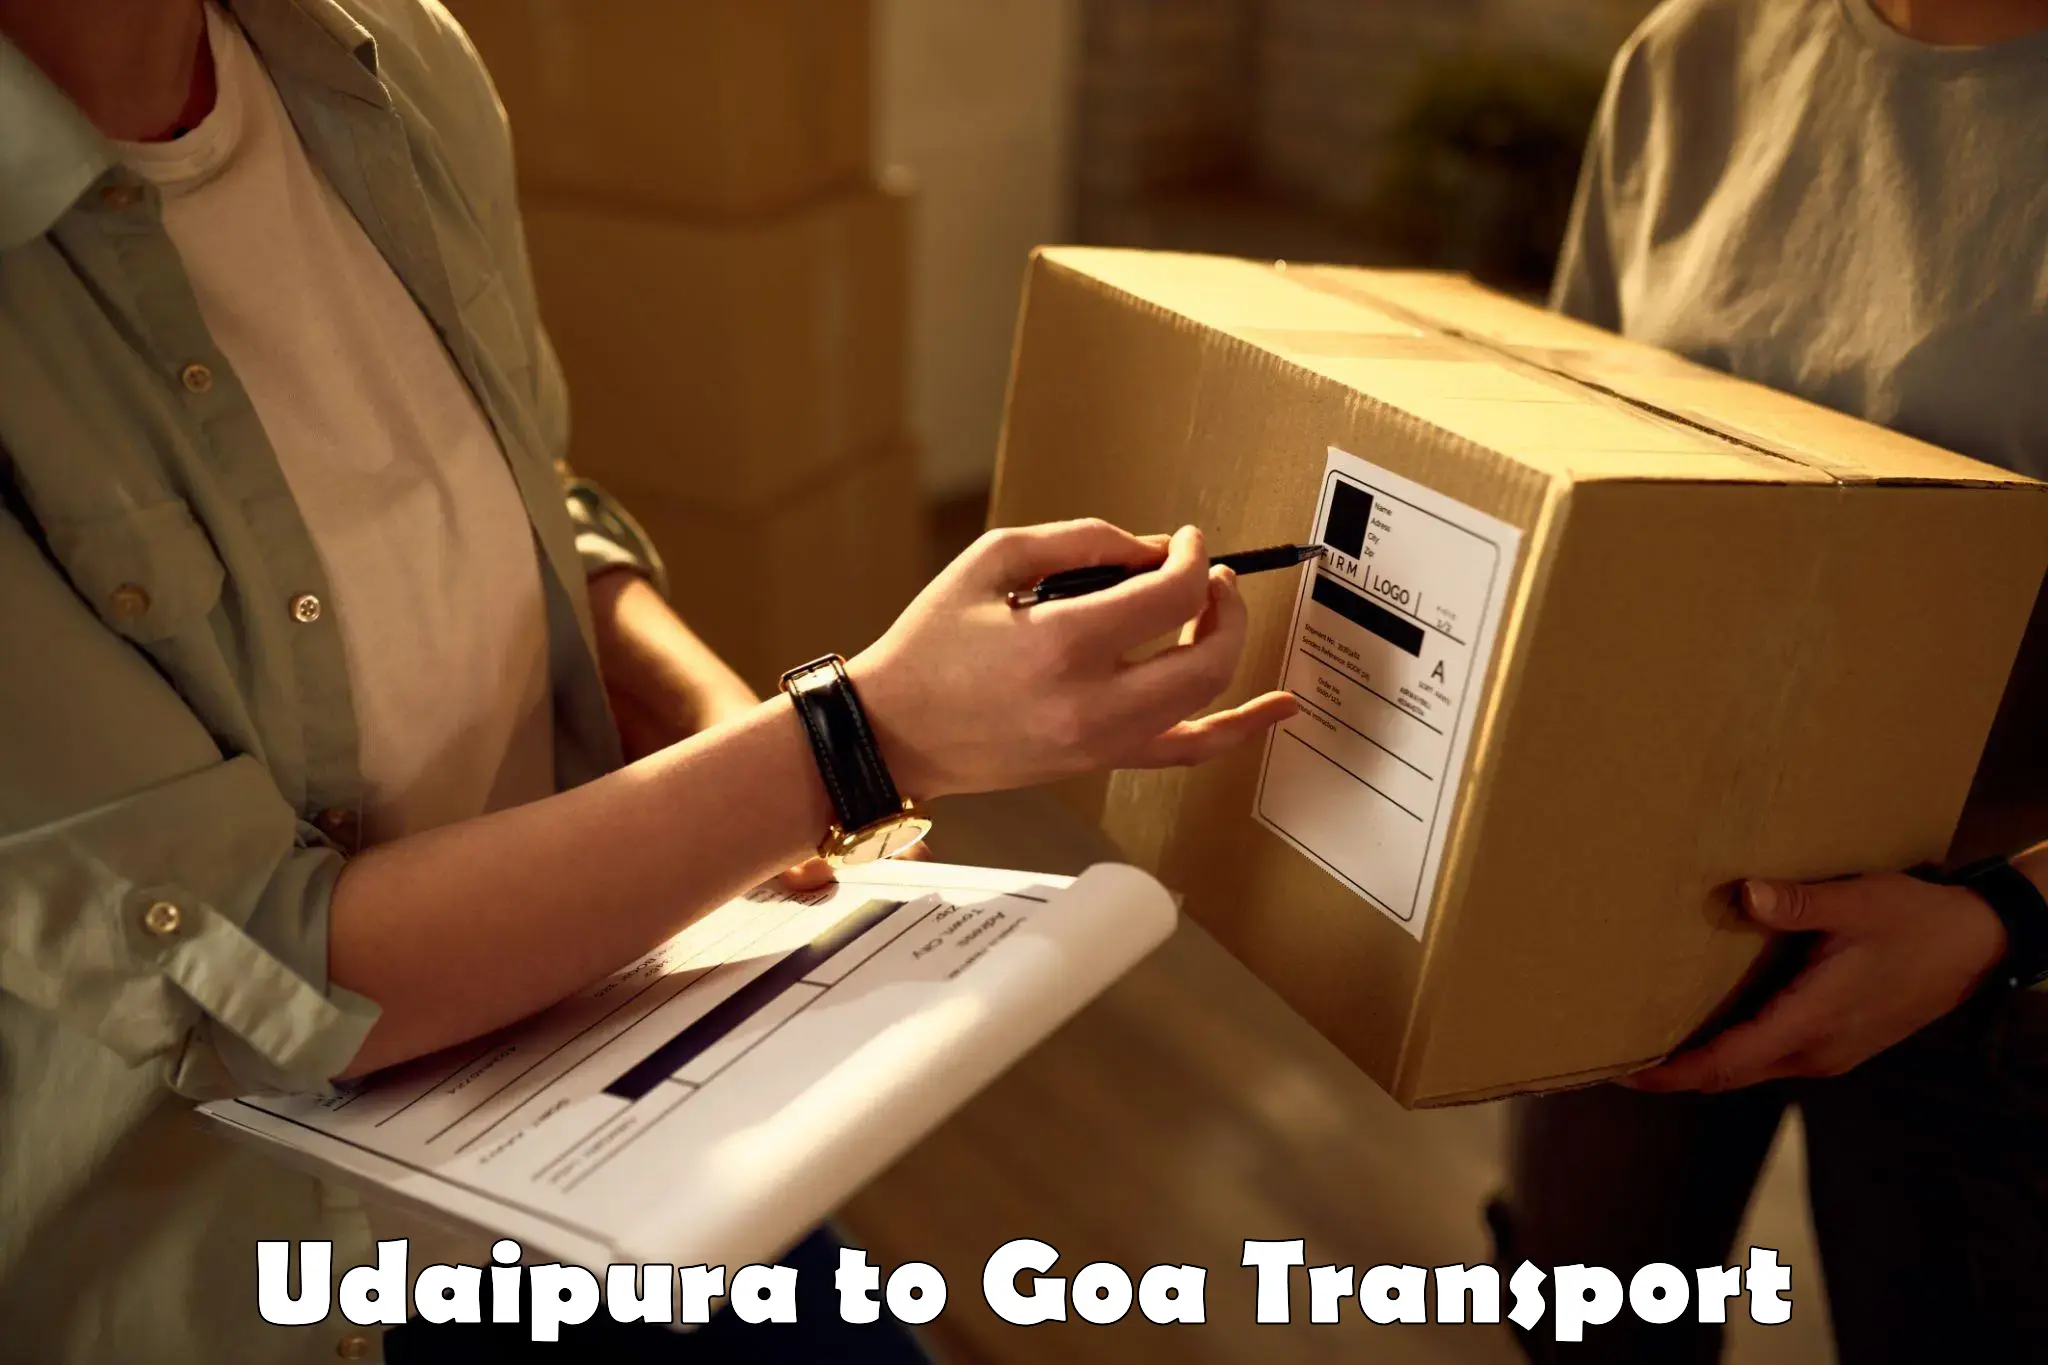 Container transport service Udaipura to Bardez